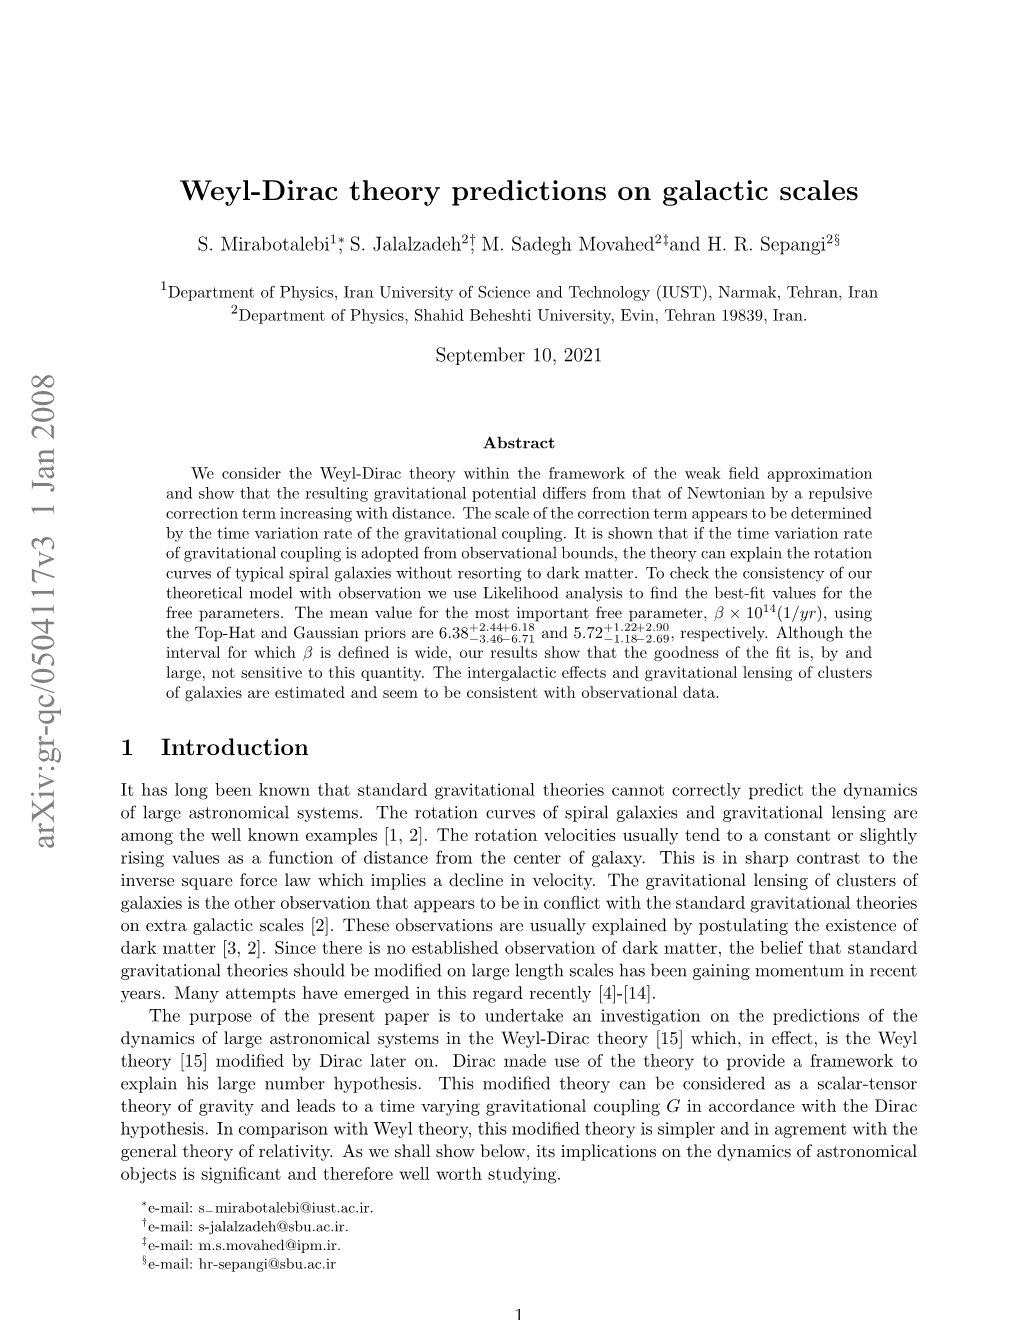 Weyl-Dirac Theory Predictions on Galactic Scales